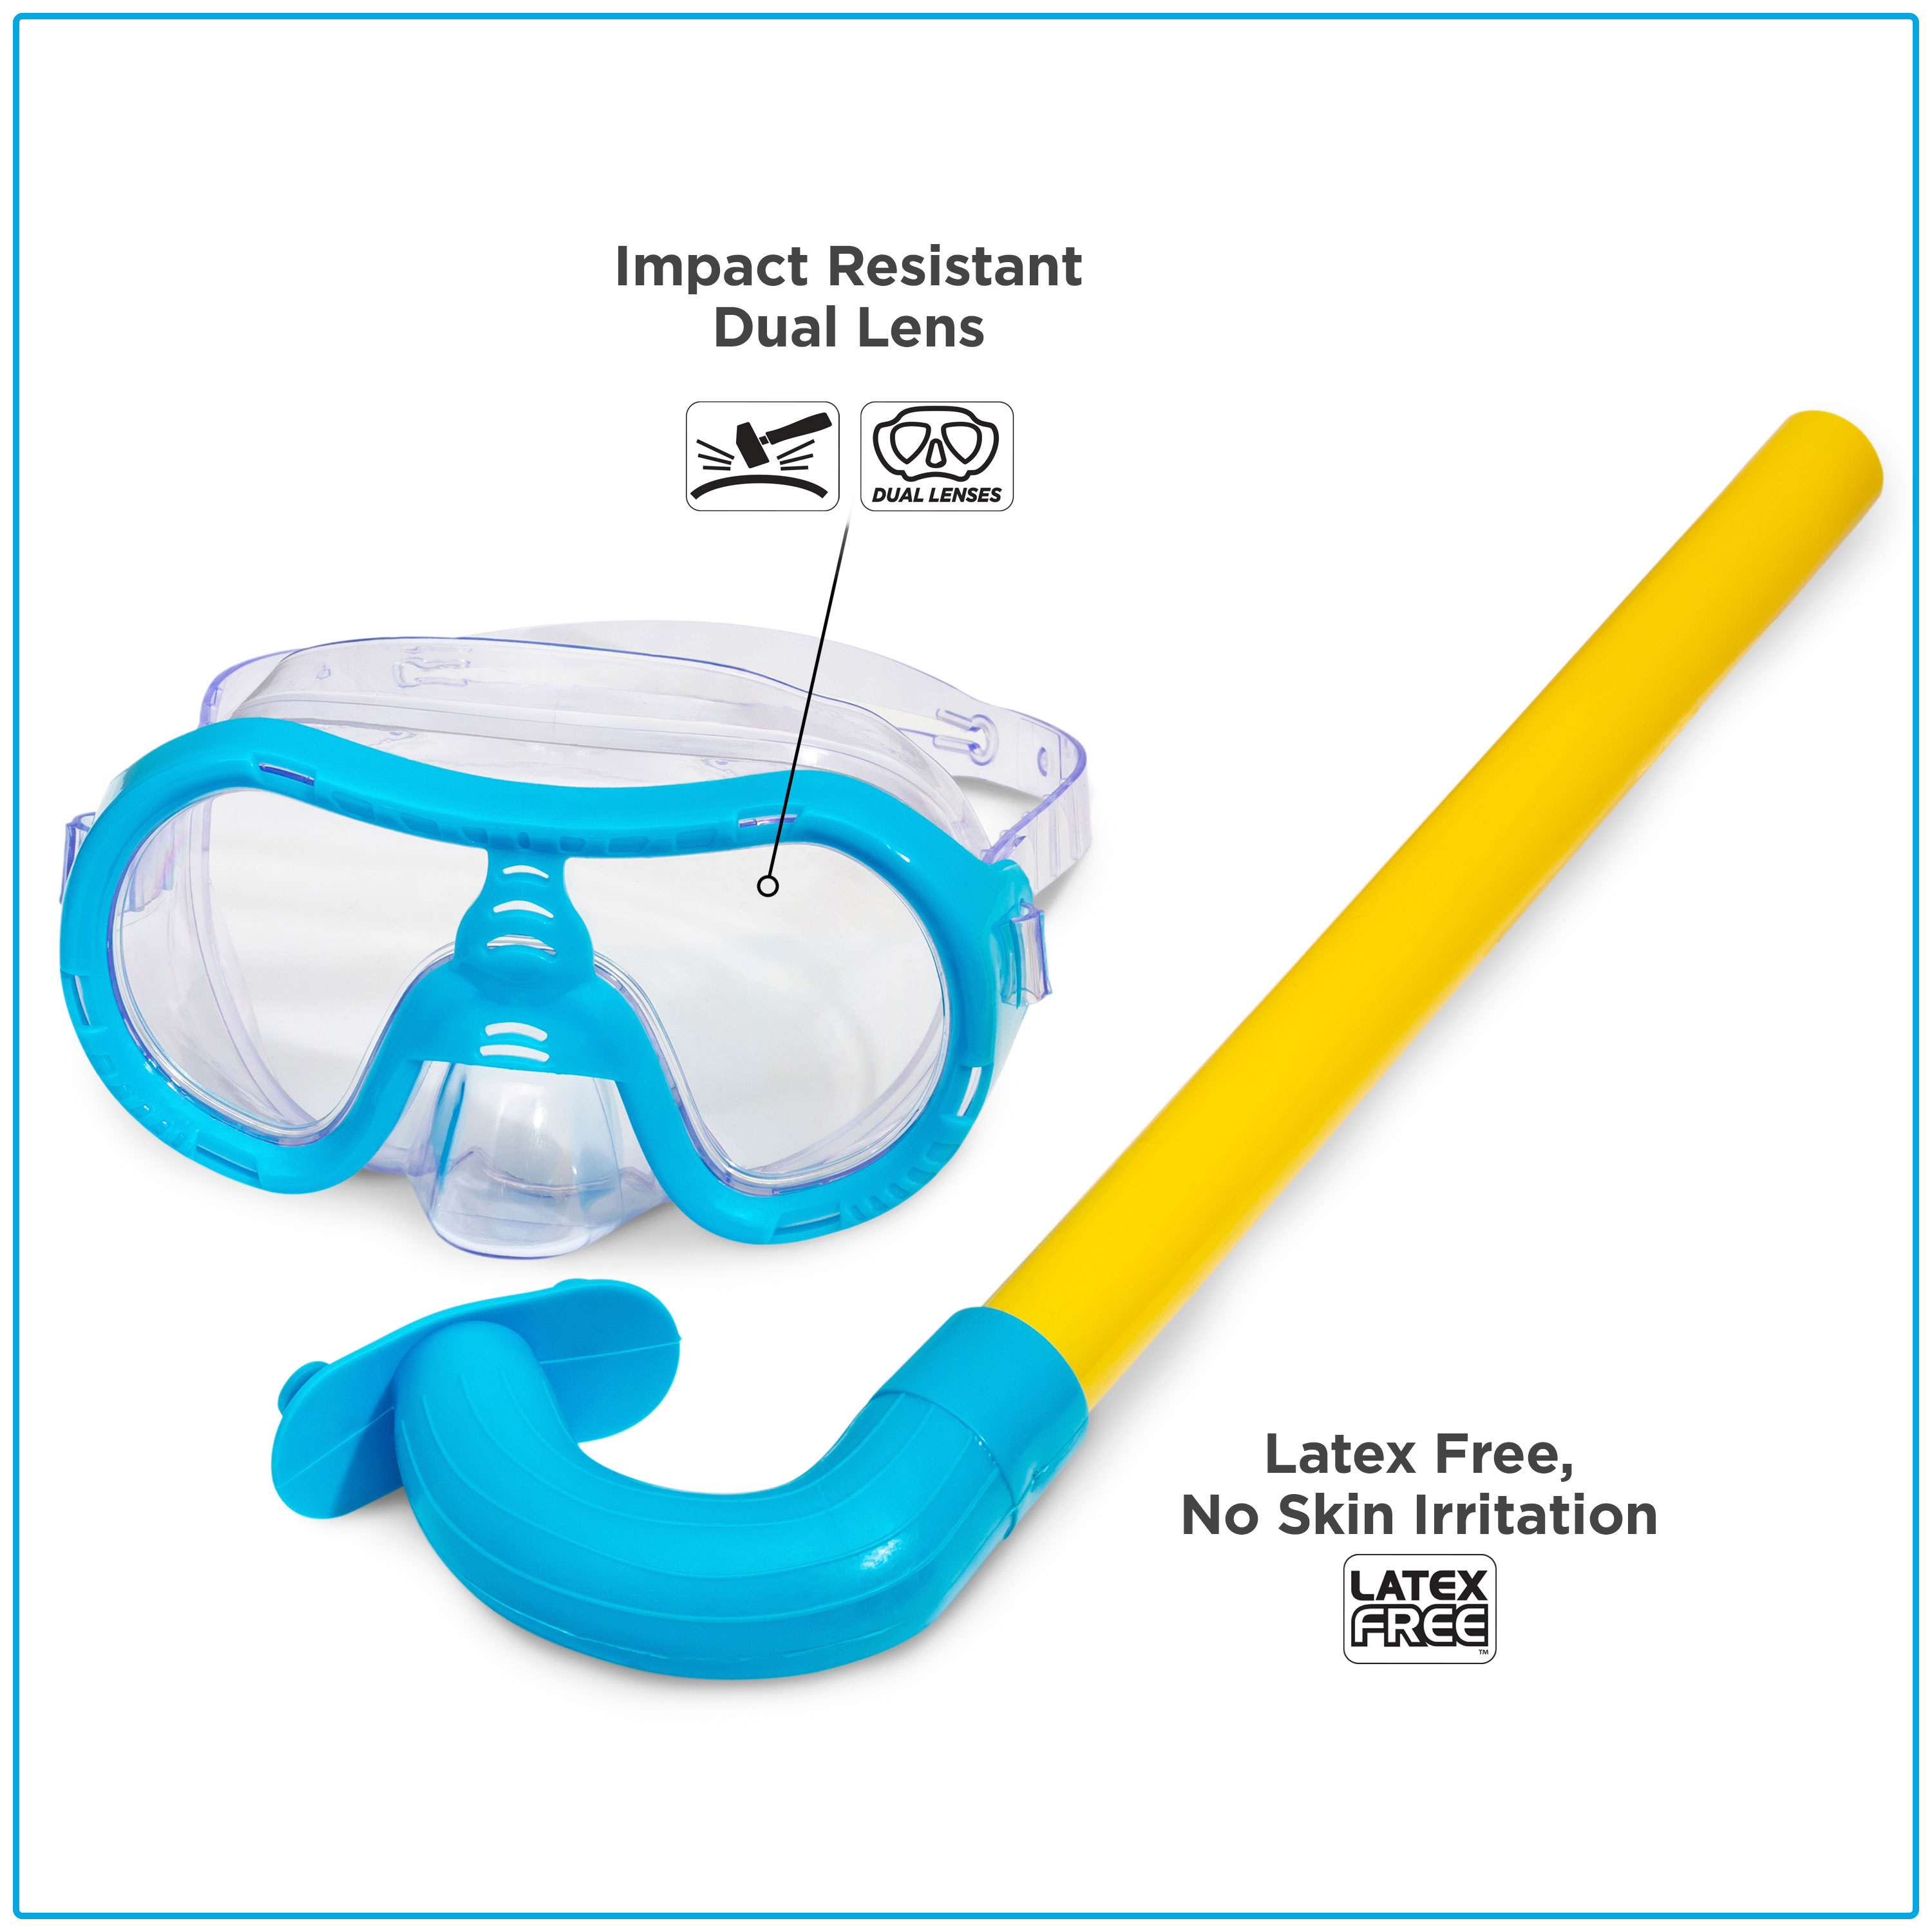 Dolfino Octopus Blue Unisex Dive Set for Children, Includes 5 Pieces, Hypoallergenic and Latex-Free - image 3 of 8